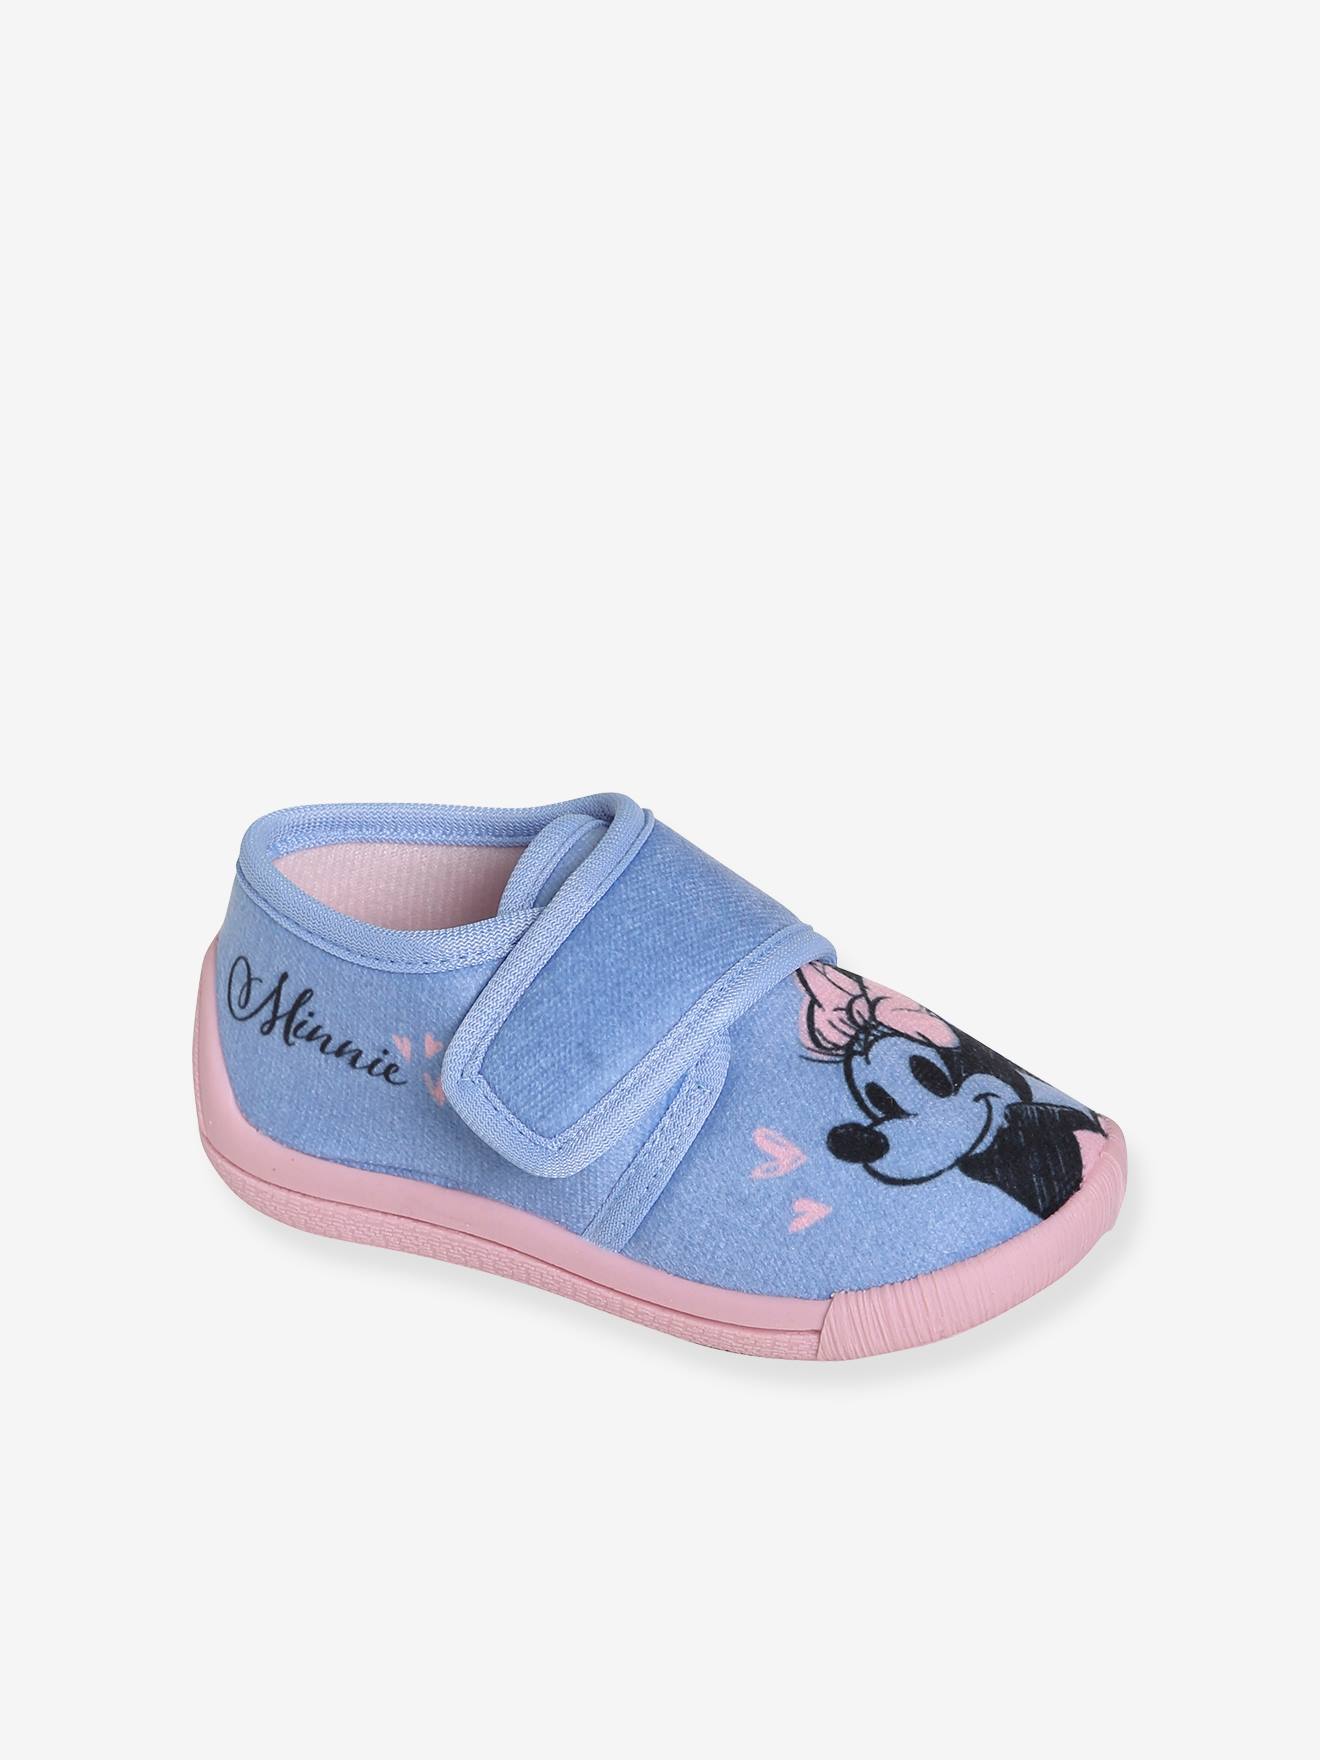 Disney® Minnie Mouse Shoes, for Children - blue medium solid with design,  Shoes